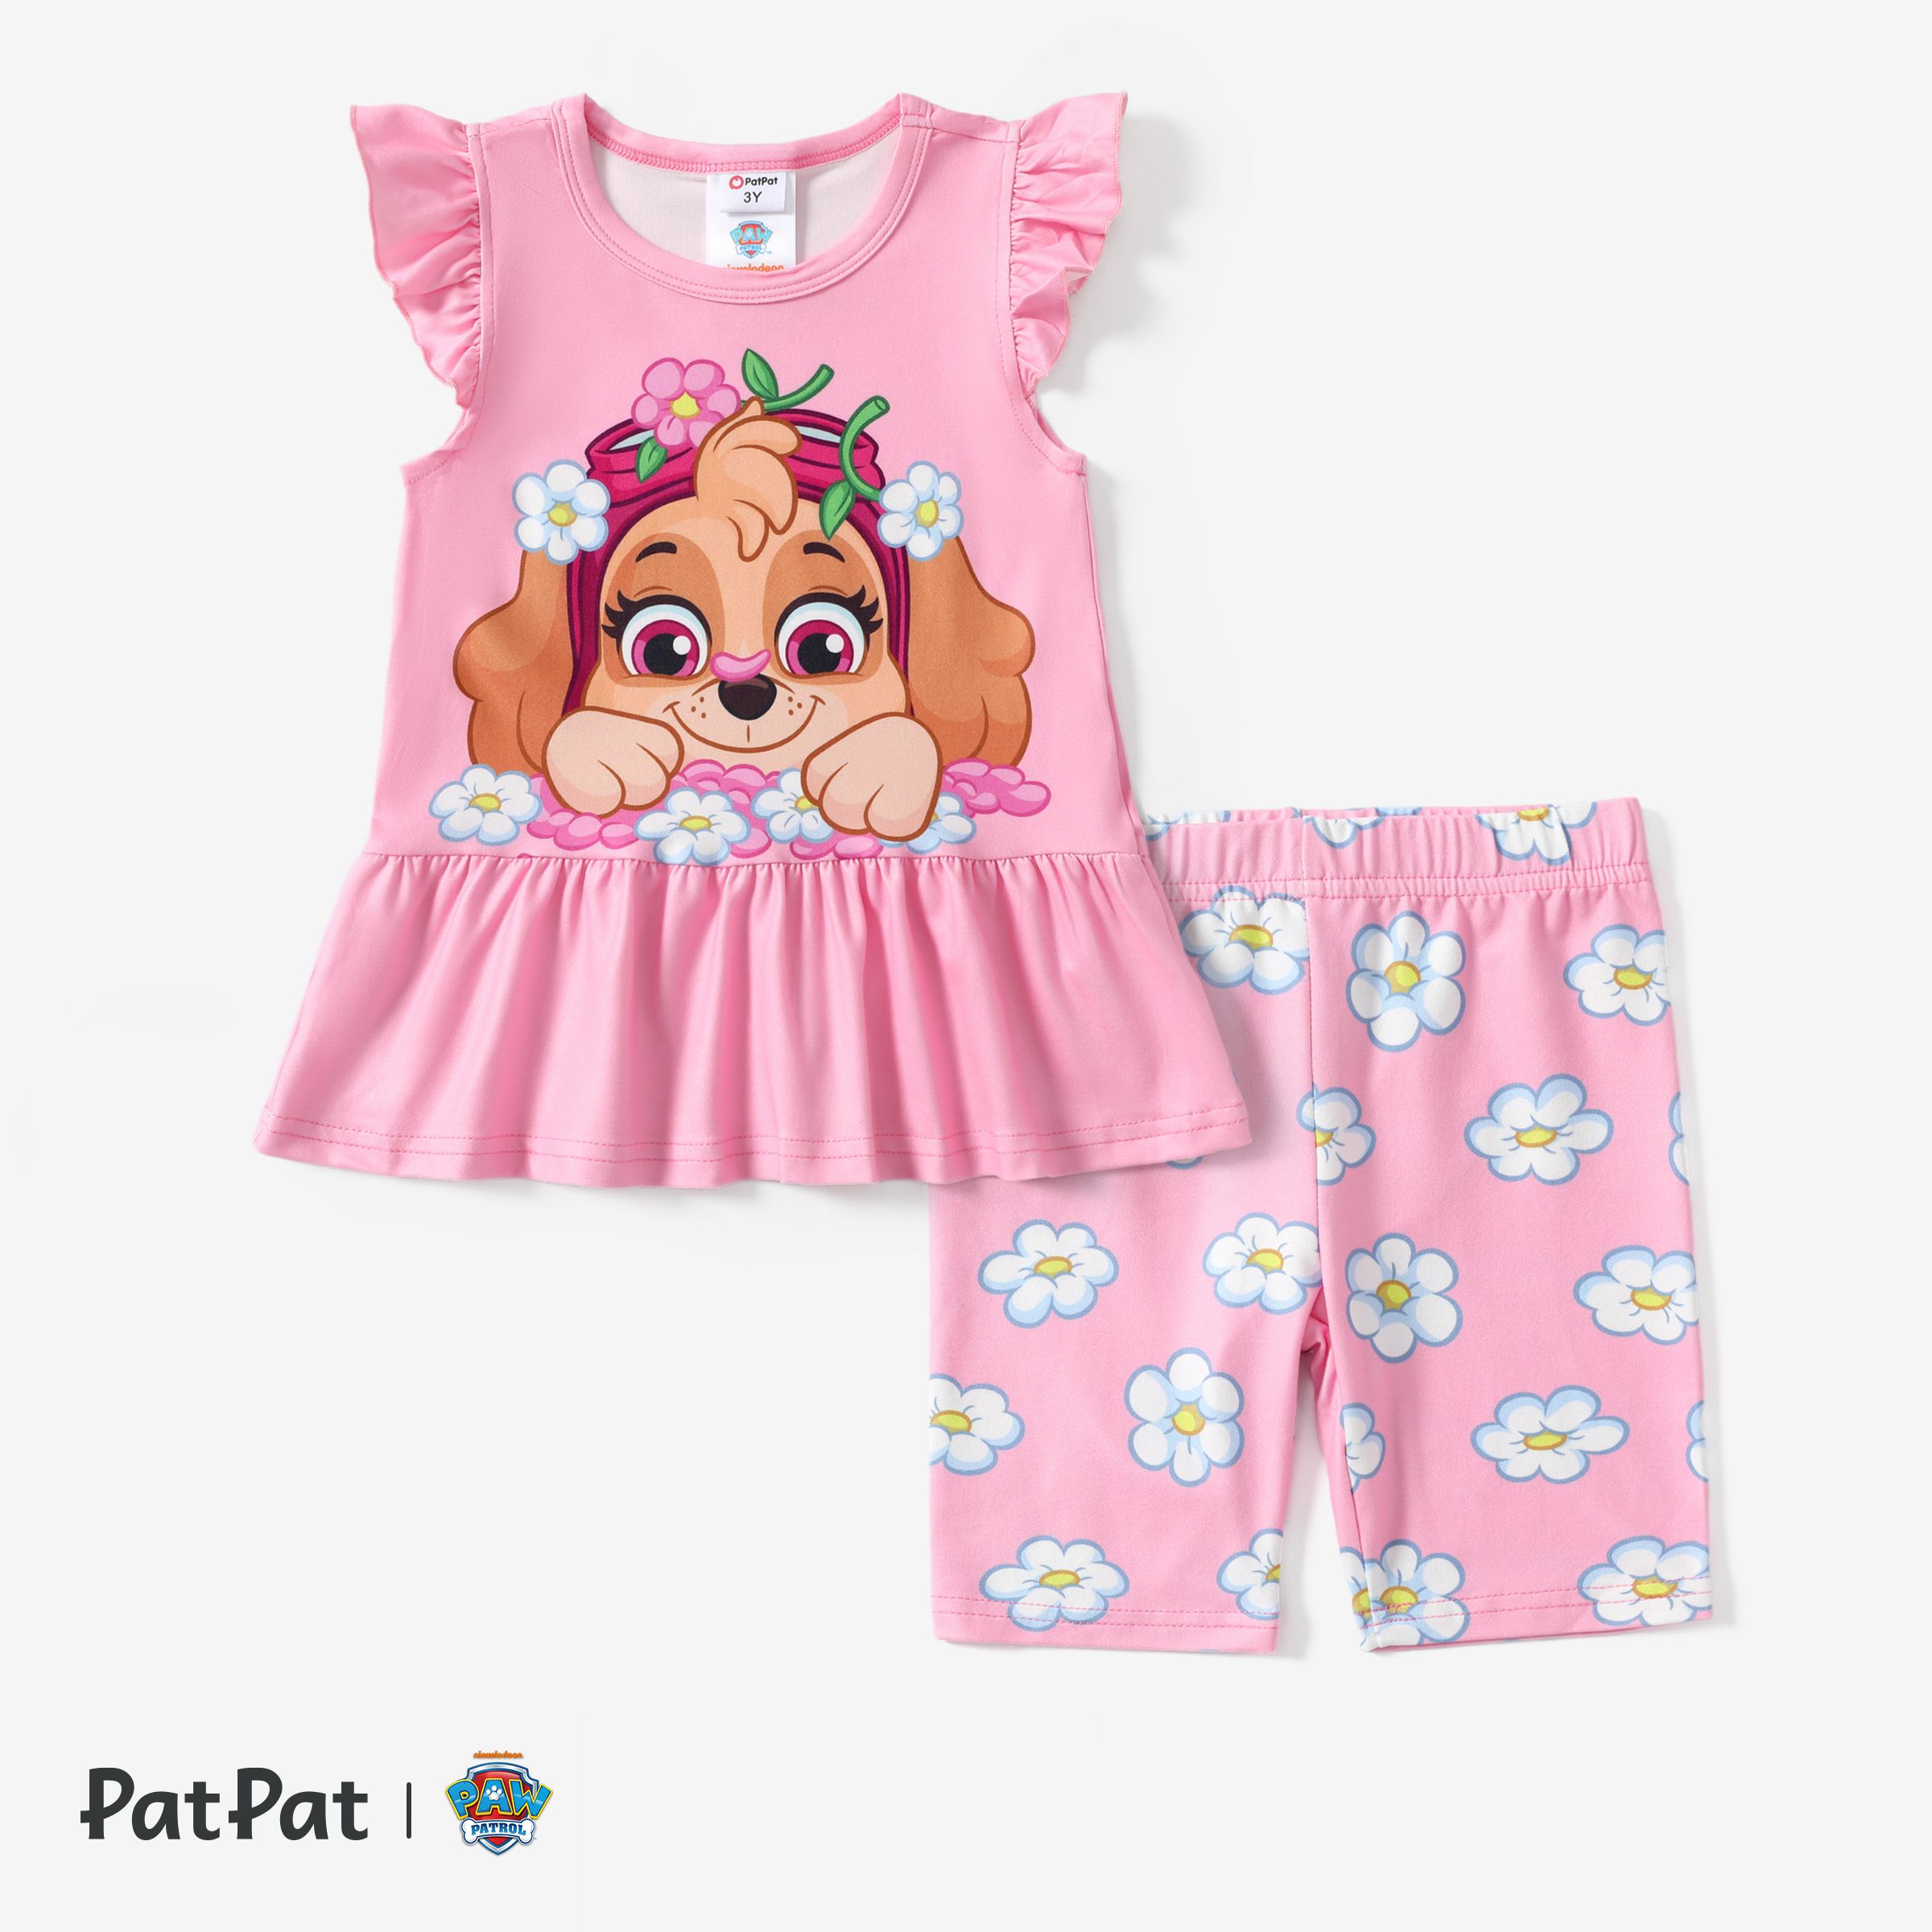 PAW Patrol Toddler GIrl Rainbow and Heart Allover Print Dress